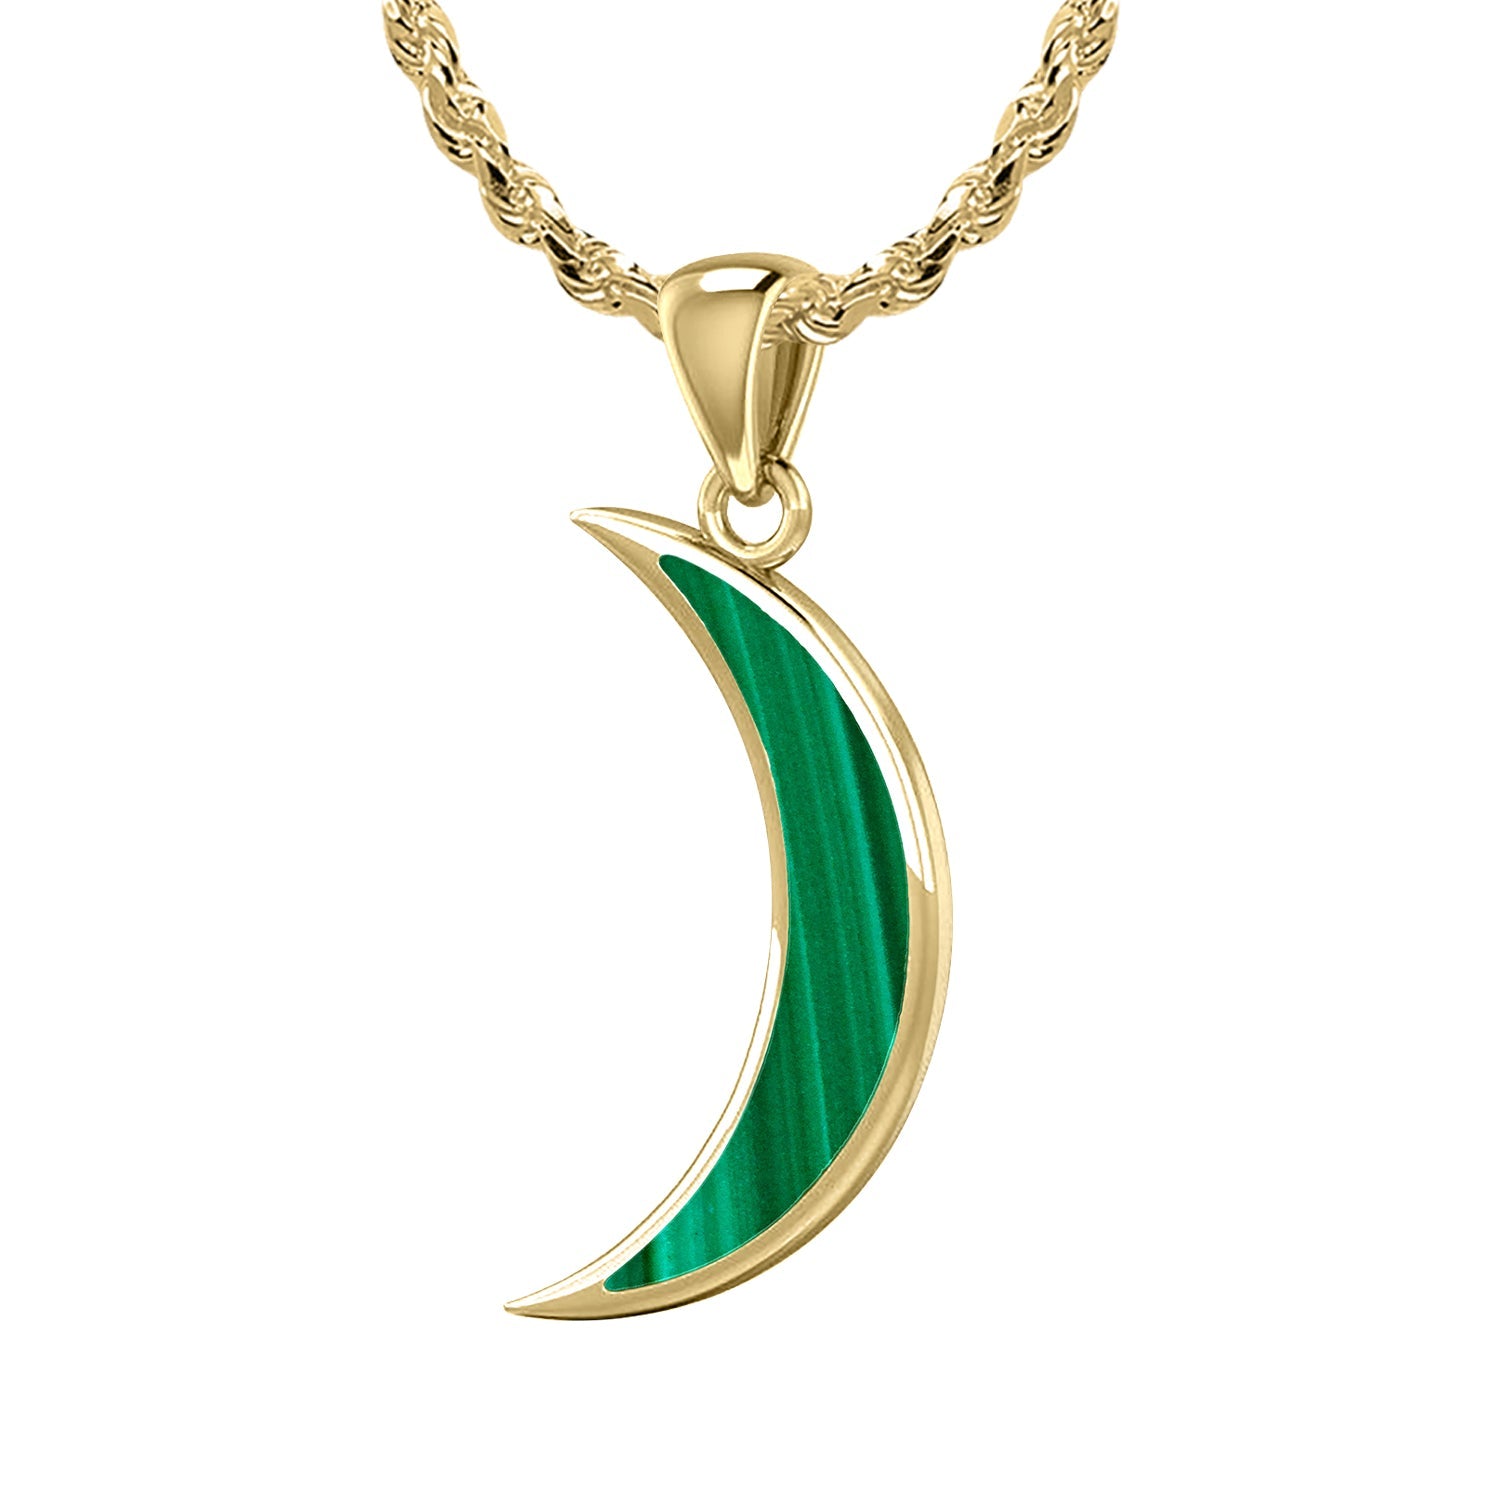 Ladies 14K Yellow Gold Simulated Malachite Magick Crescent Moon Pendant Necklace, 25mm - US Jewels